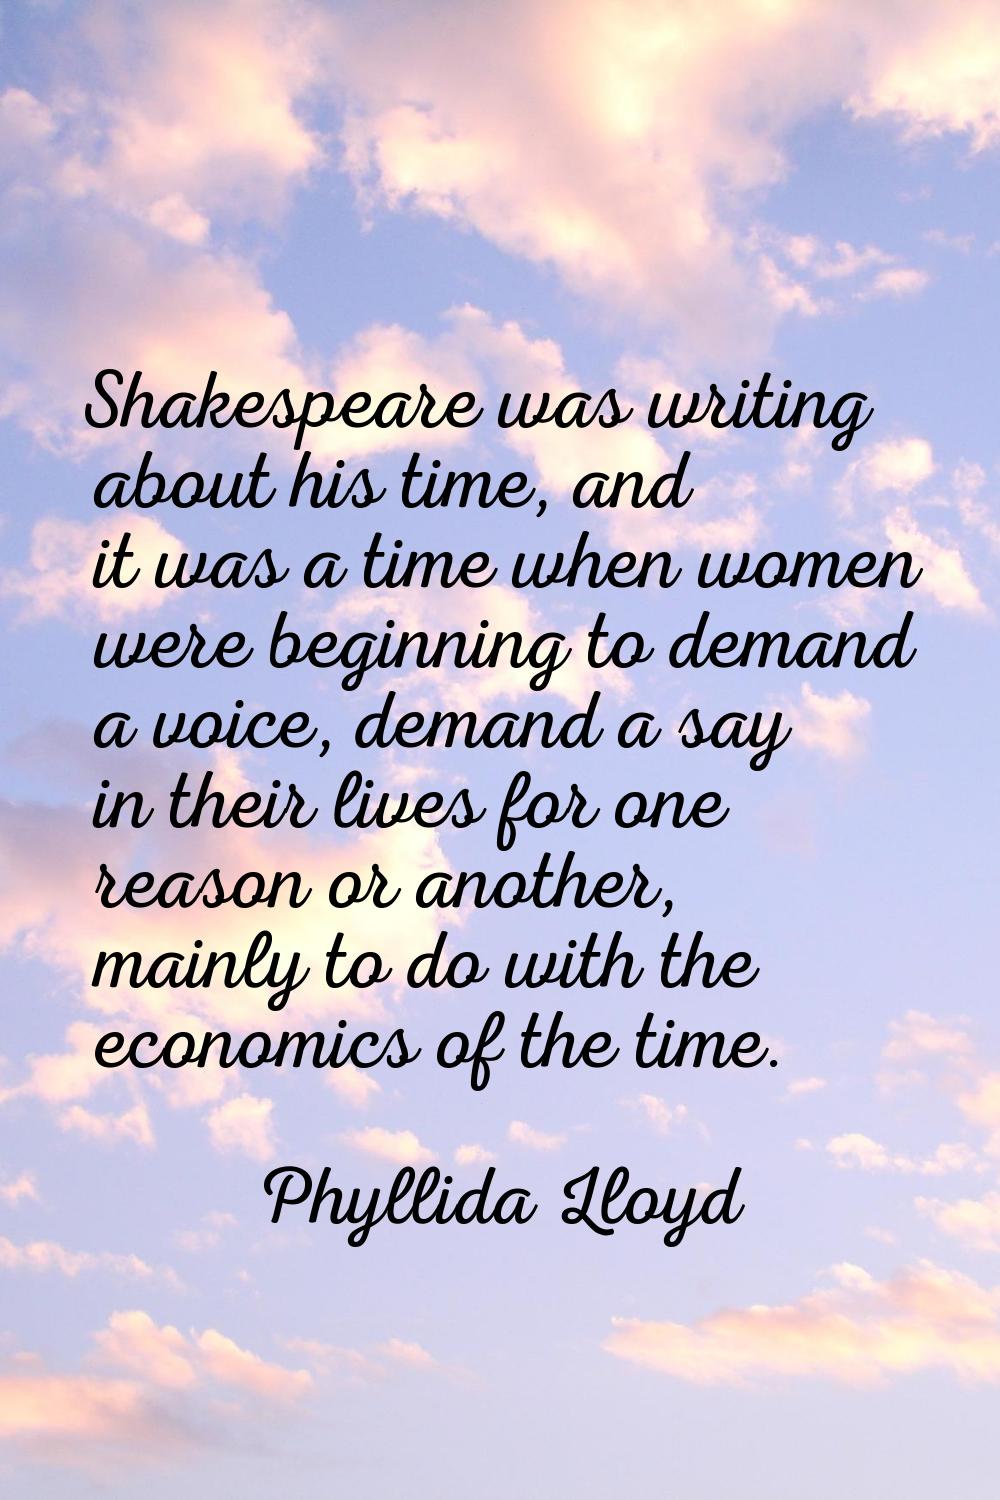 Shakespeare was writing about his time, and it was a time when women were beginning to demand a voi